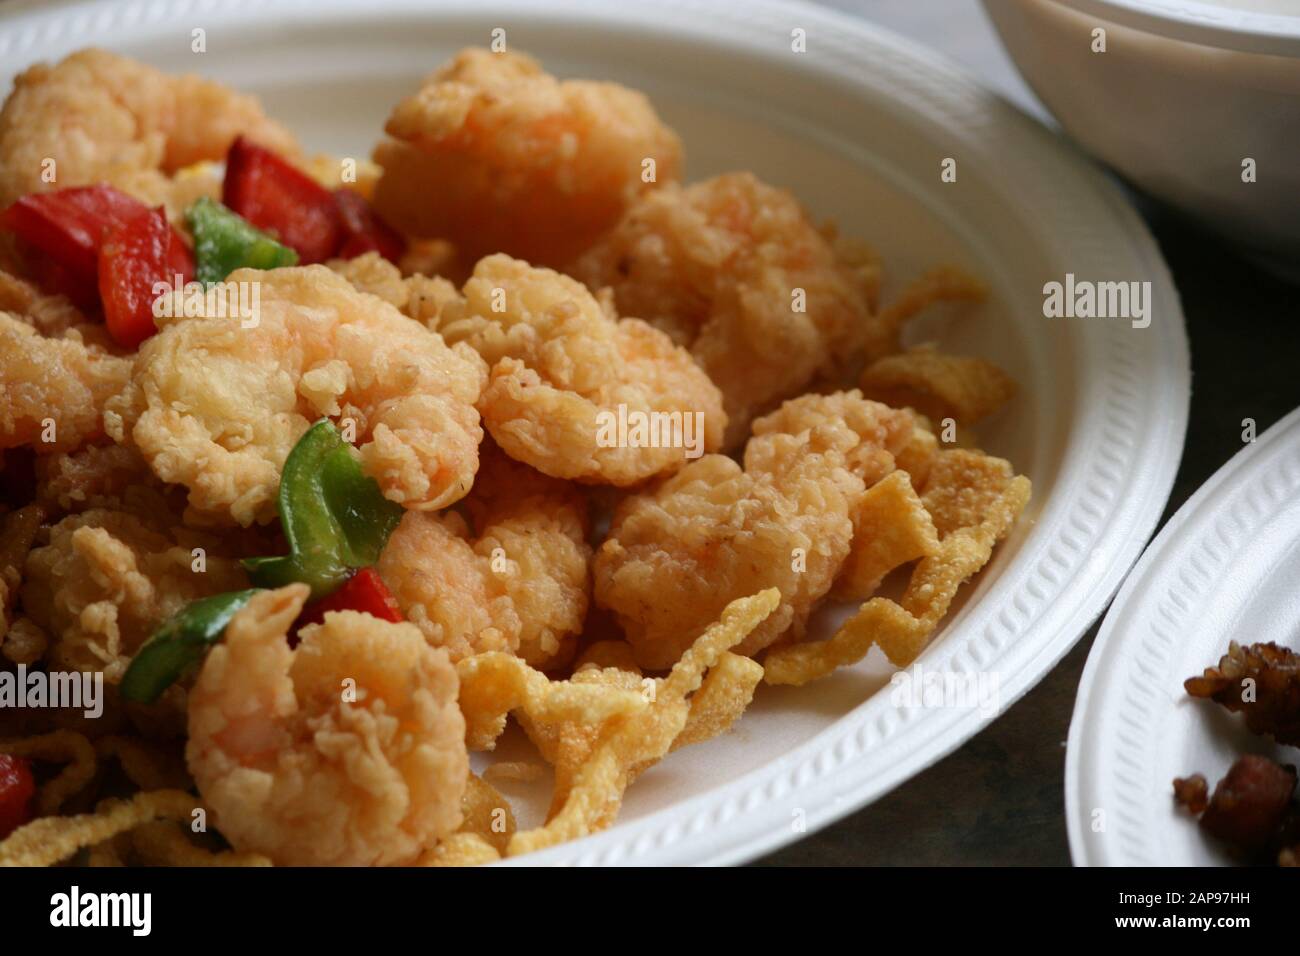 Chinese food in asian market deep fried shrimp restaurant take out or eat in food court food Stock Photo